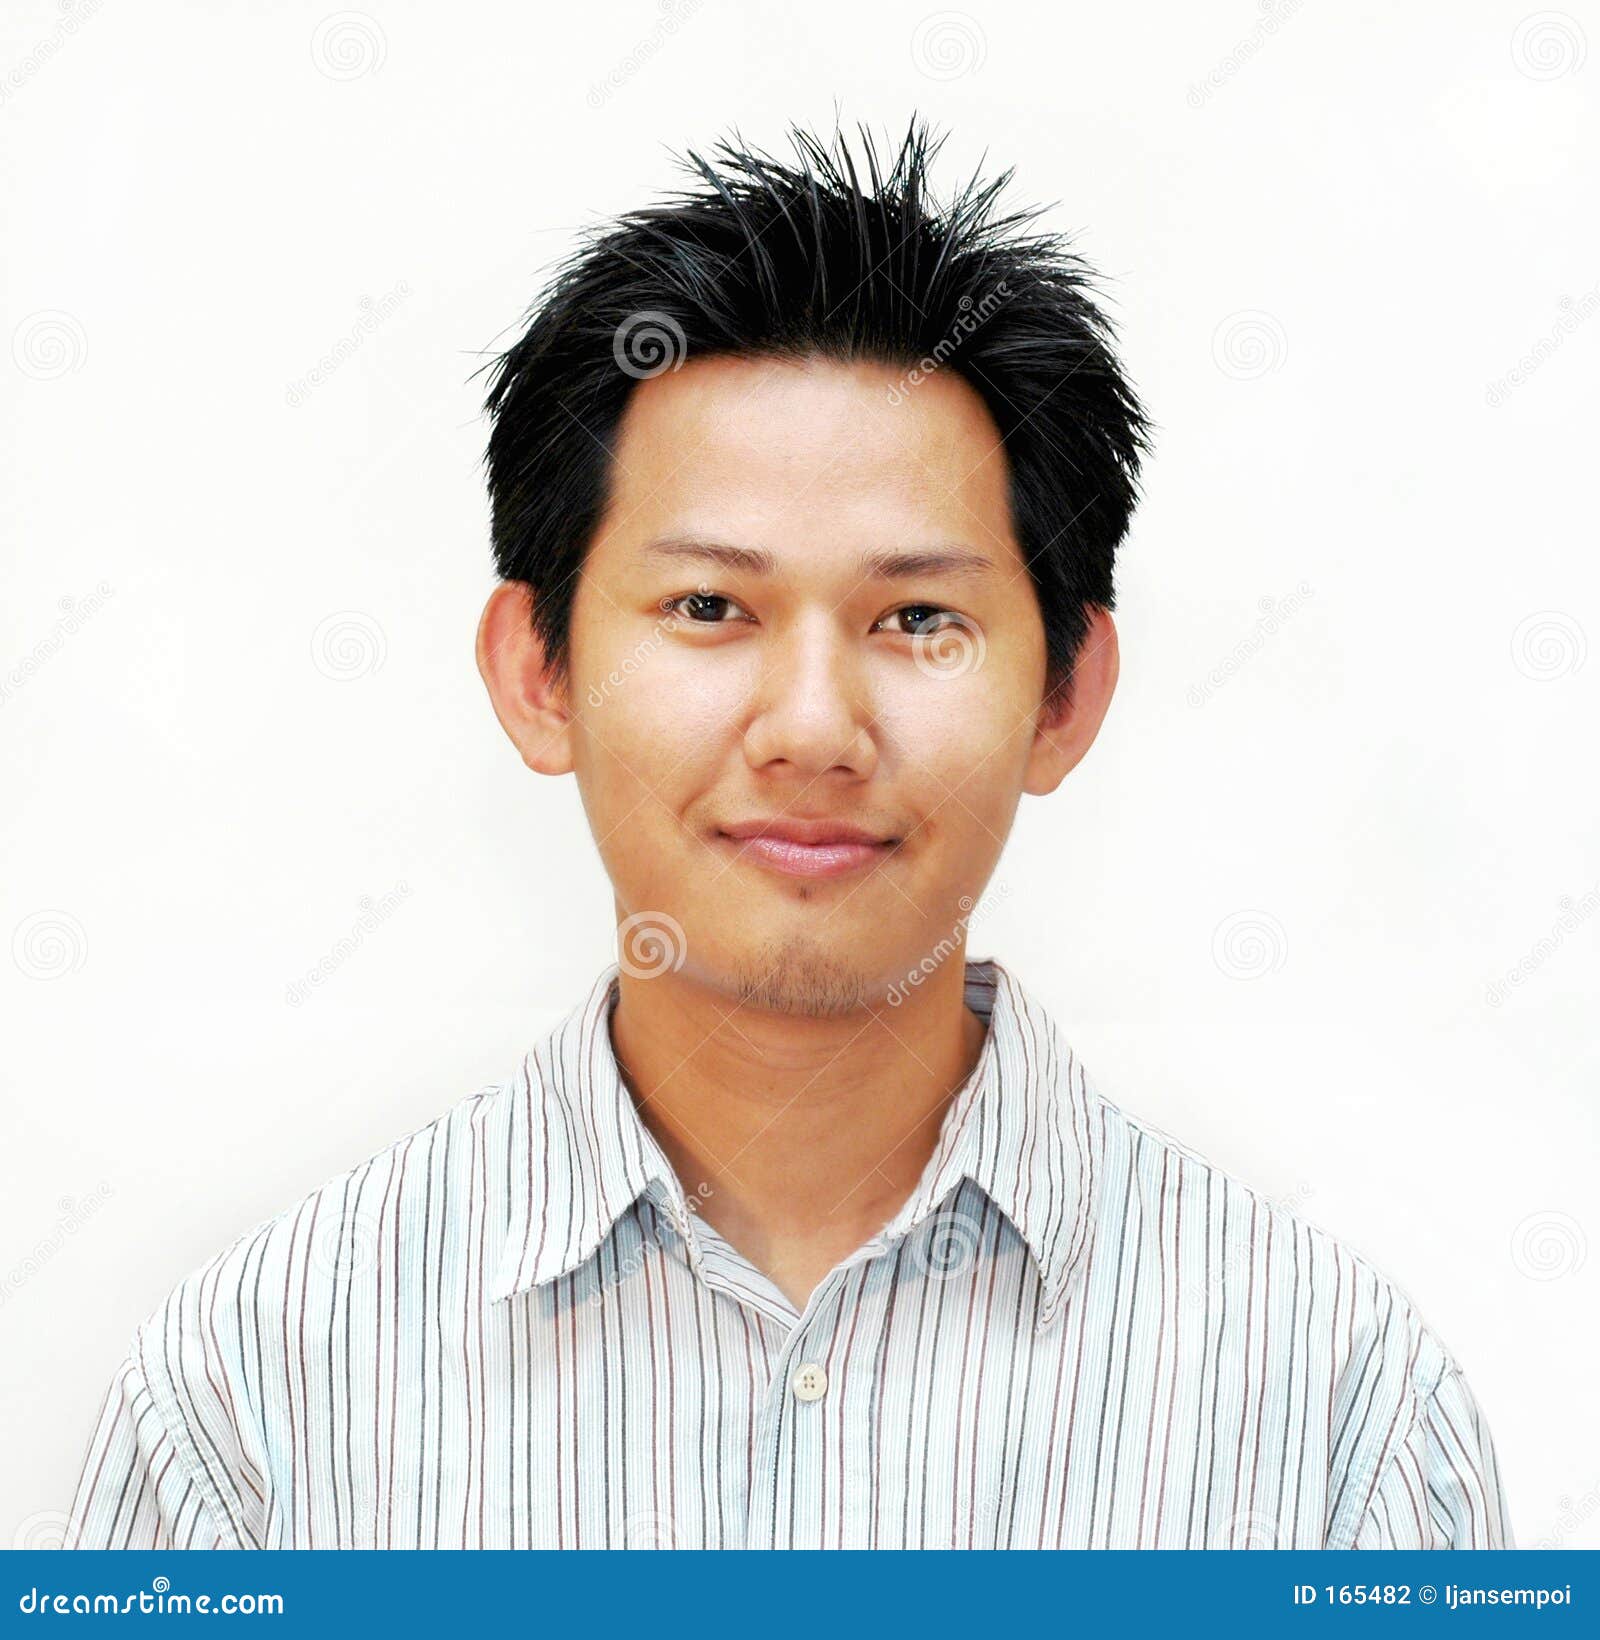 Asian Male Image 43